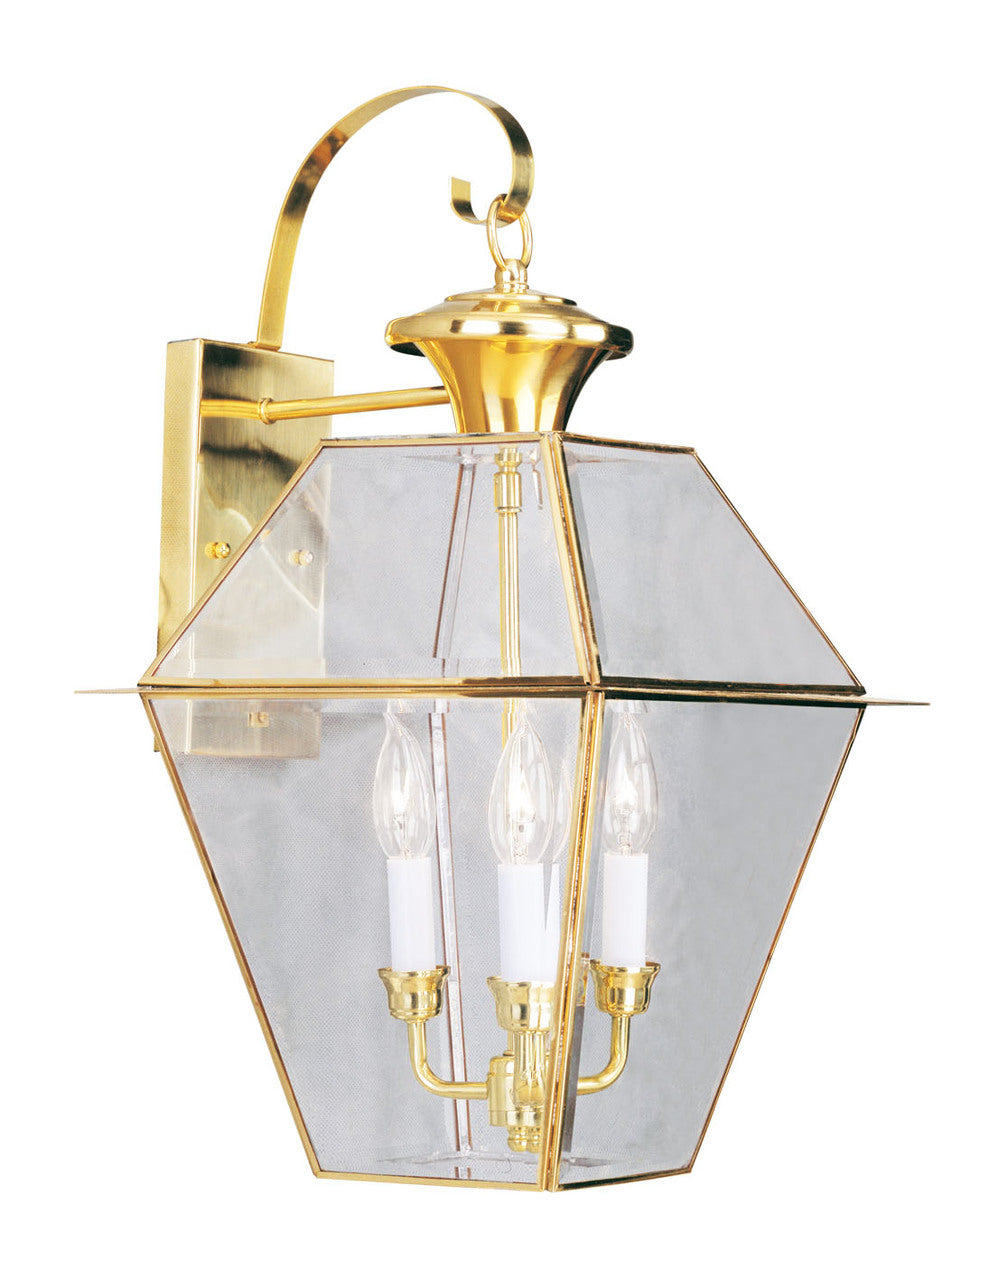 LIVEX Lighting 2381-02 Westover Outdoor Wall Lantern in Polished Brass (3 Light)